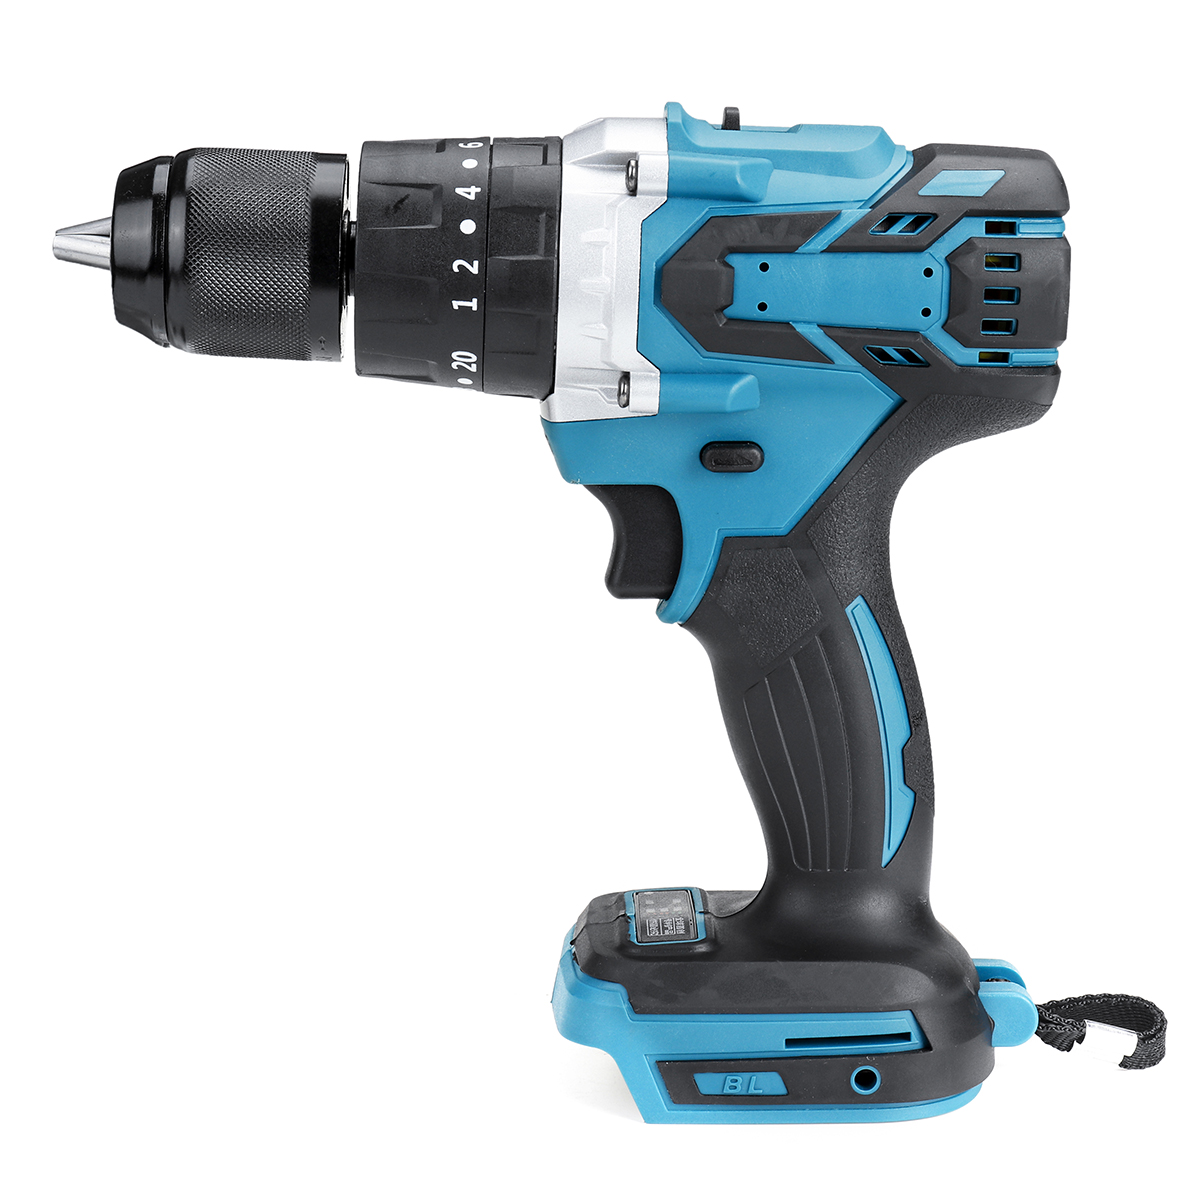 VIOLEWORKS-350Nm-3-In-1-Regulated-Speed-Drill-Brushless-Electric-Impact-Drill-Driver-Hammer-Drill-Fo-1698395-6